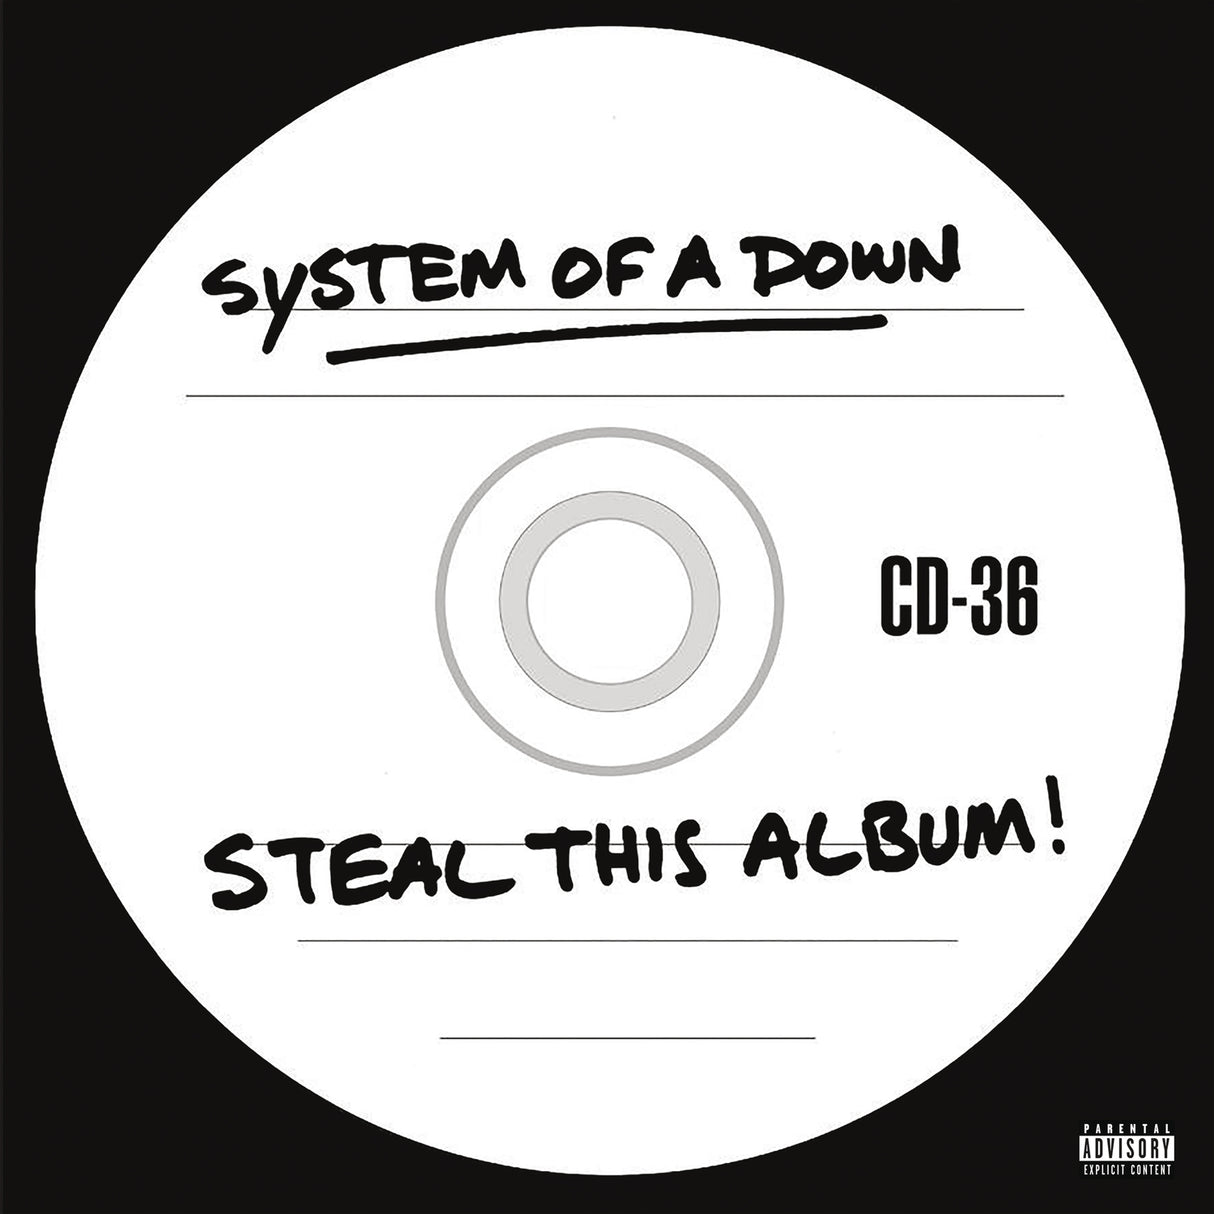 System Of A Down Steal This Album! Vinyl - Paladin Vinyl